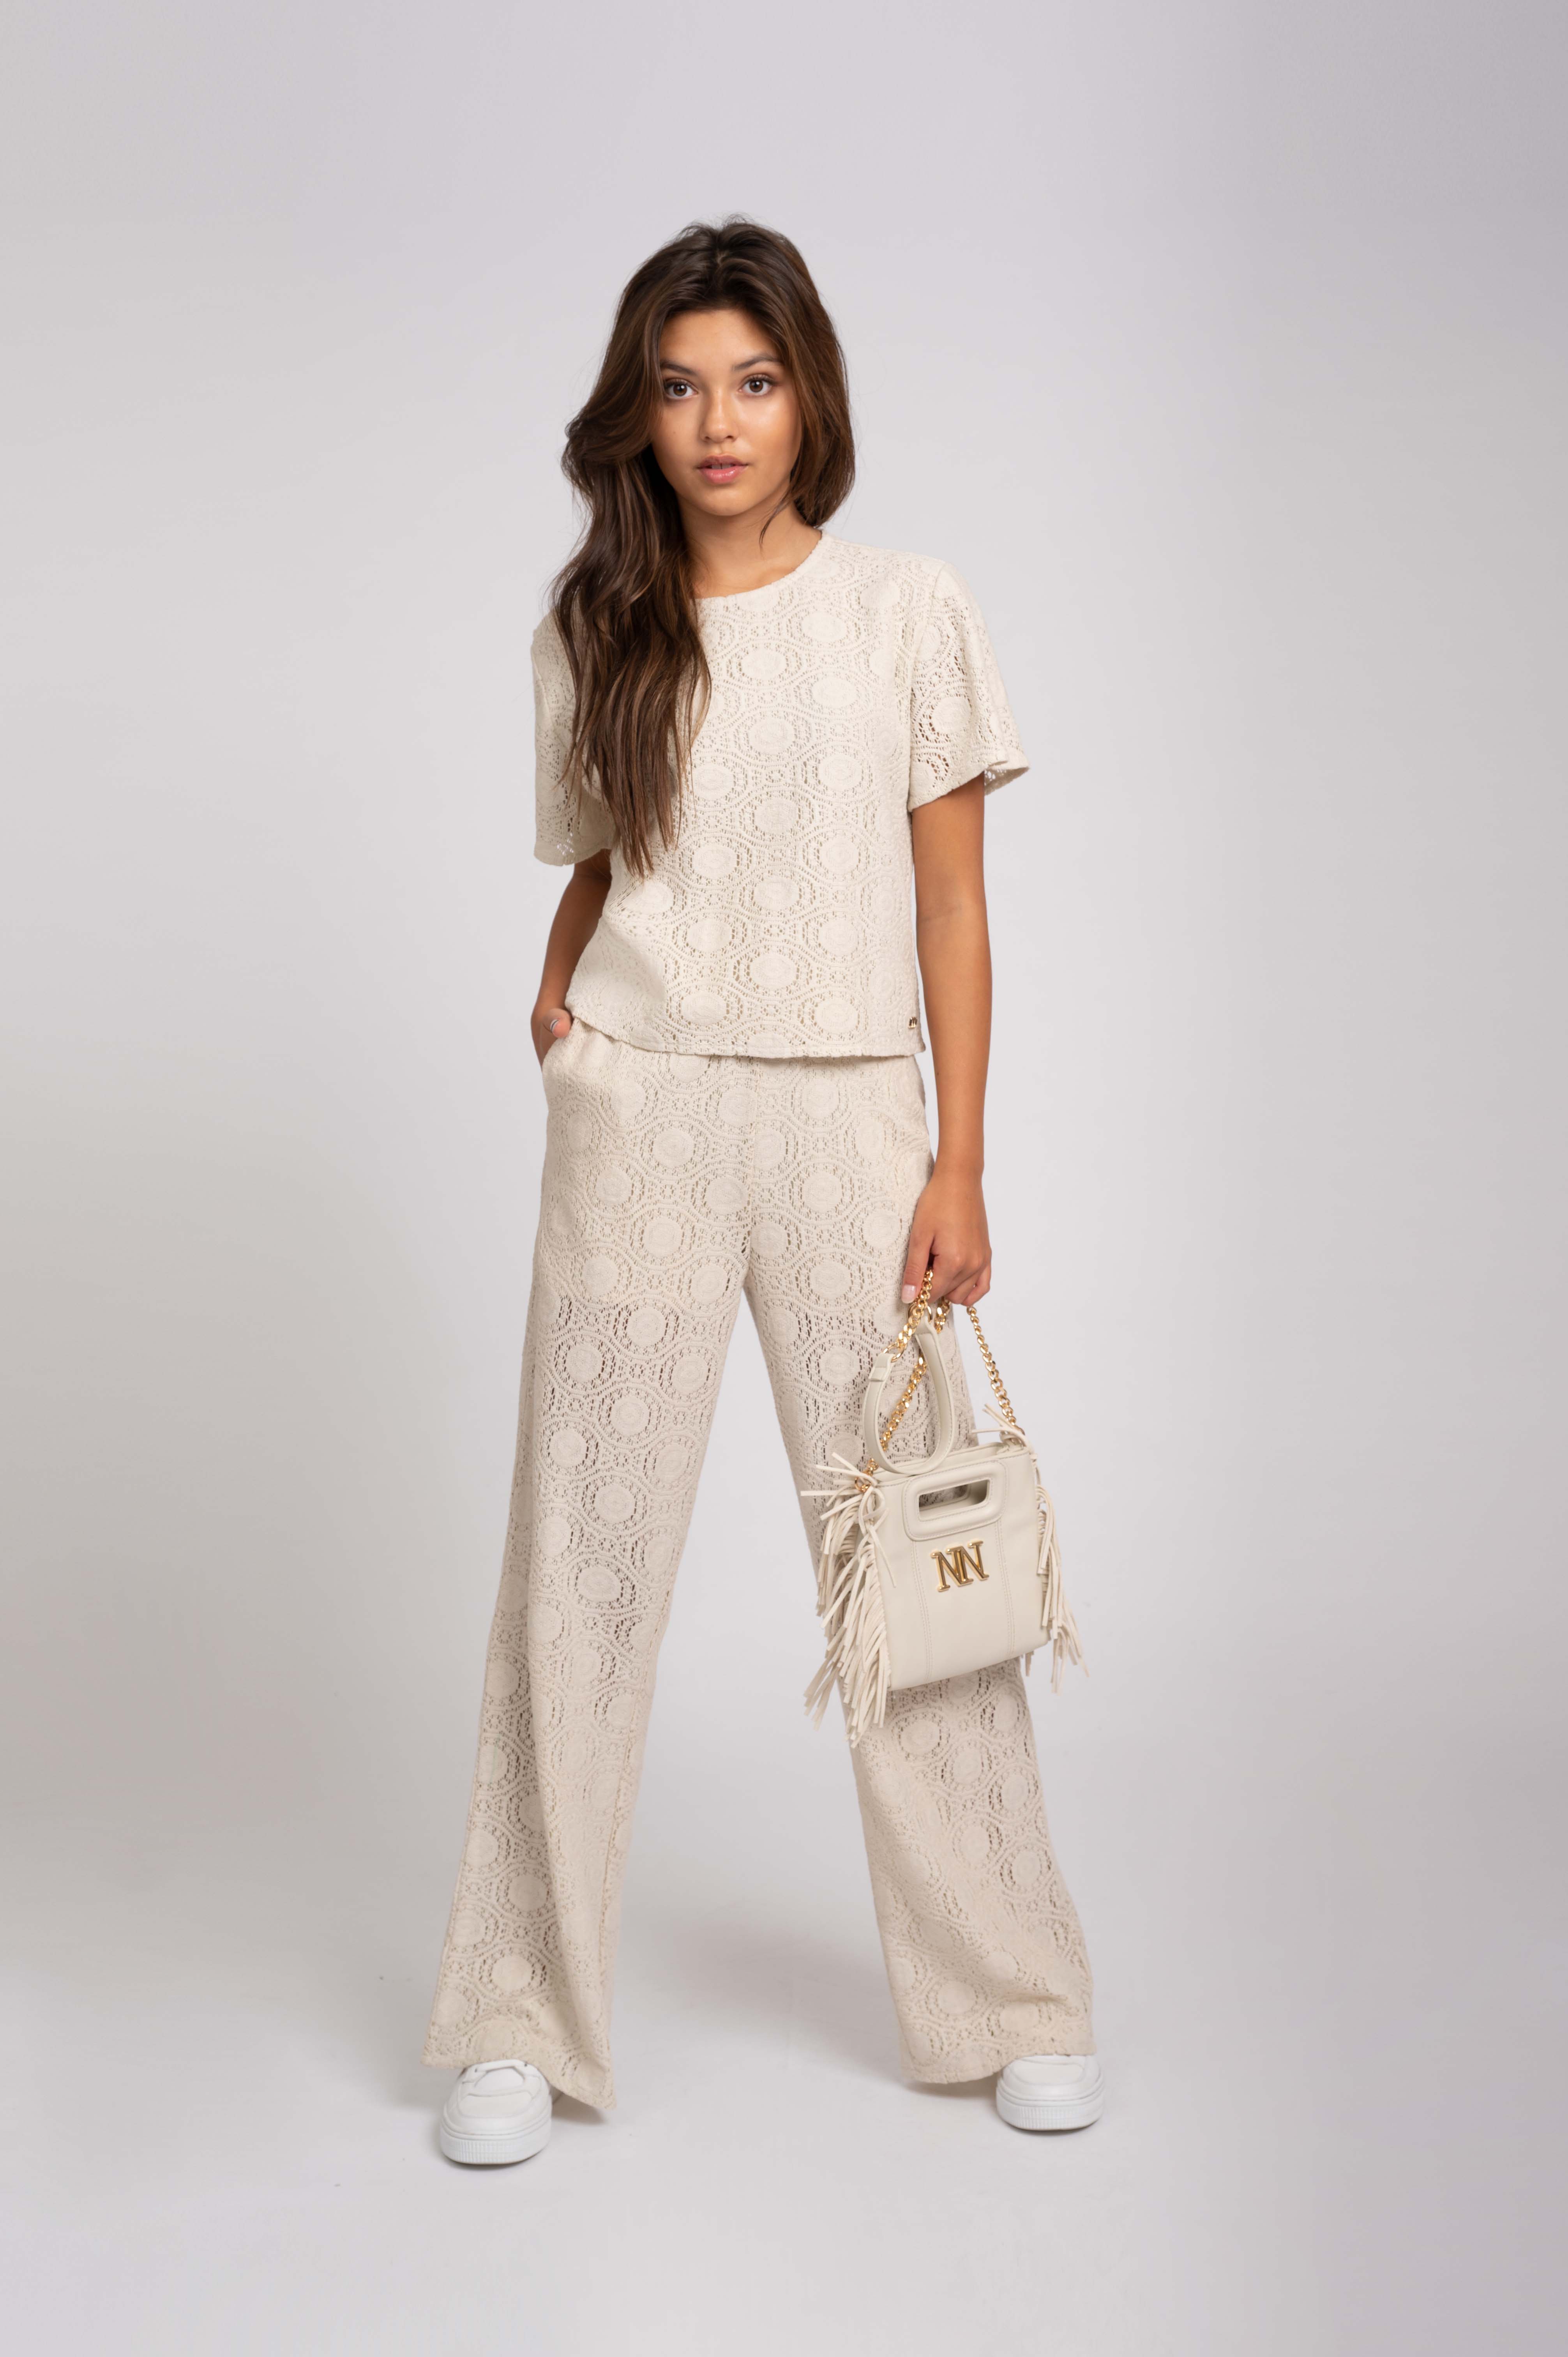 Loose fit pants with mid rise 